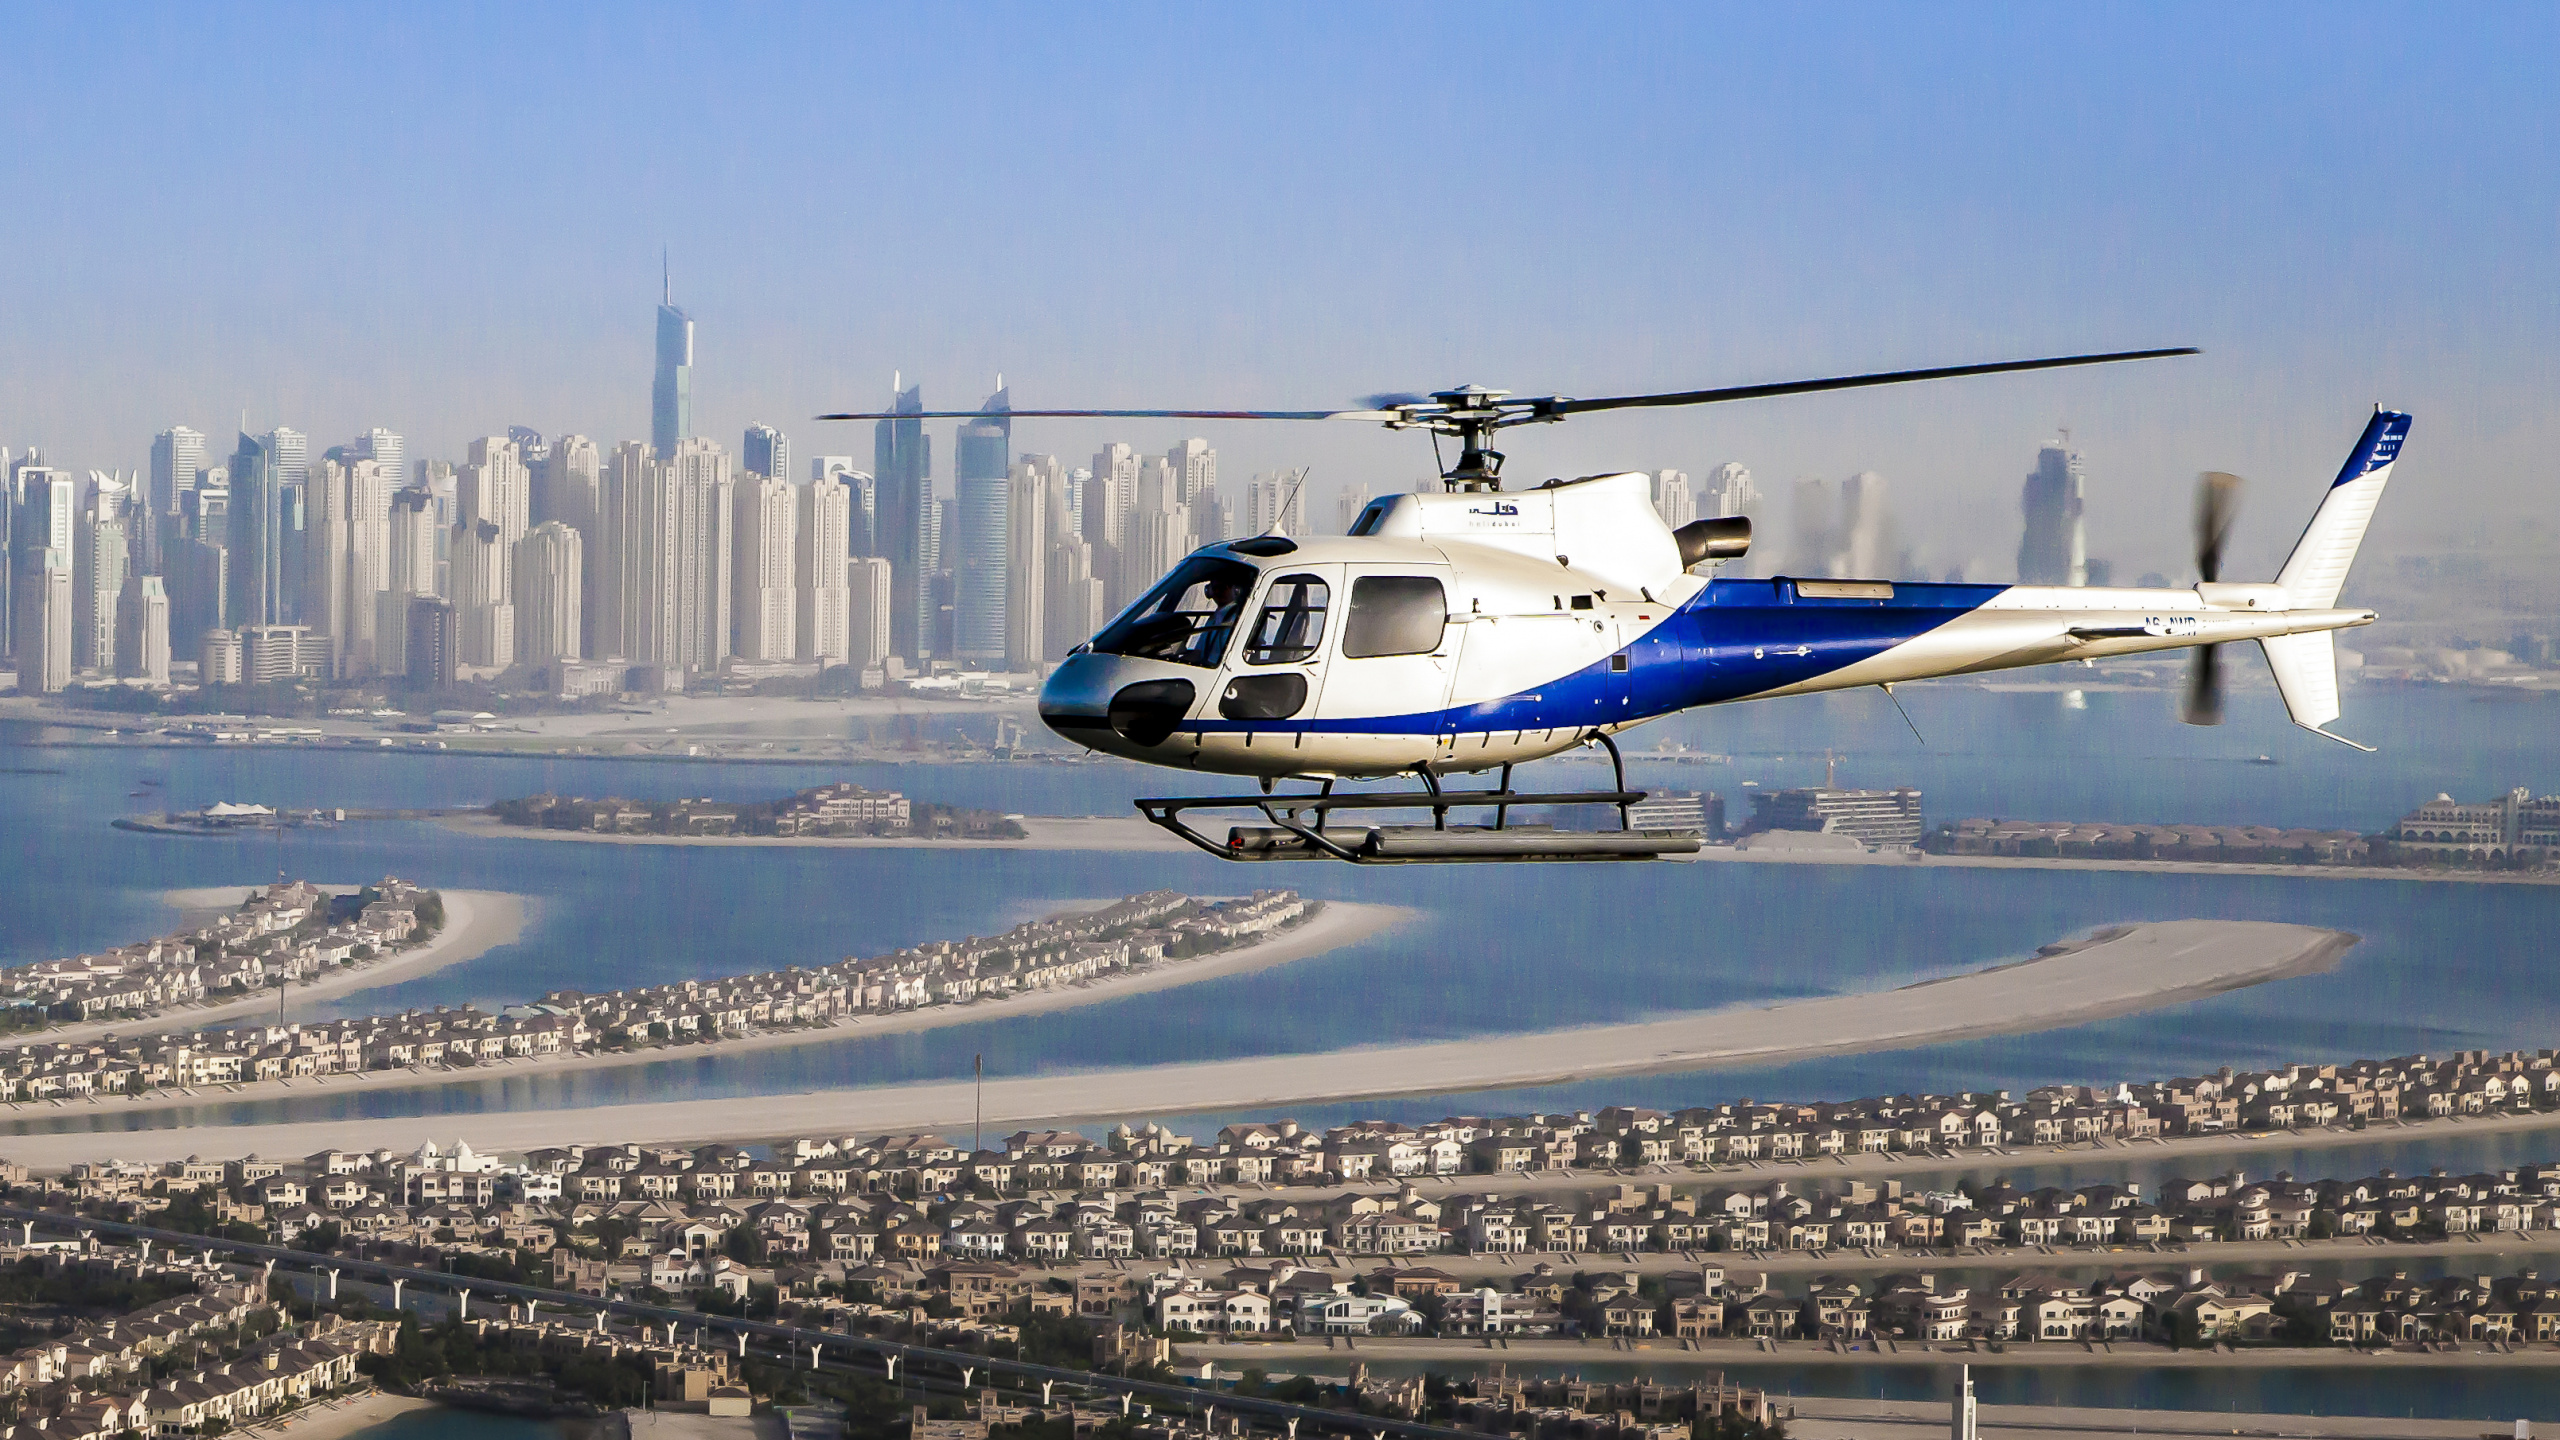 White and Blue Helicopter Flying Over City Buildings During Daytime. Wallpaper in 2560x1440 Resolution